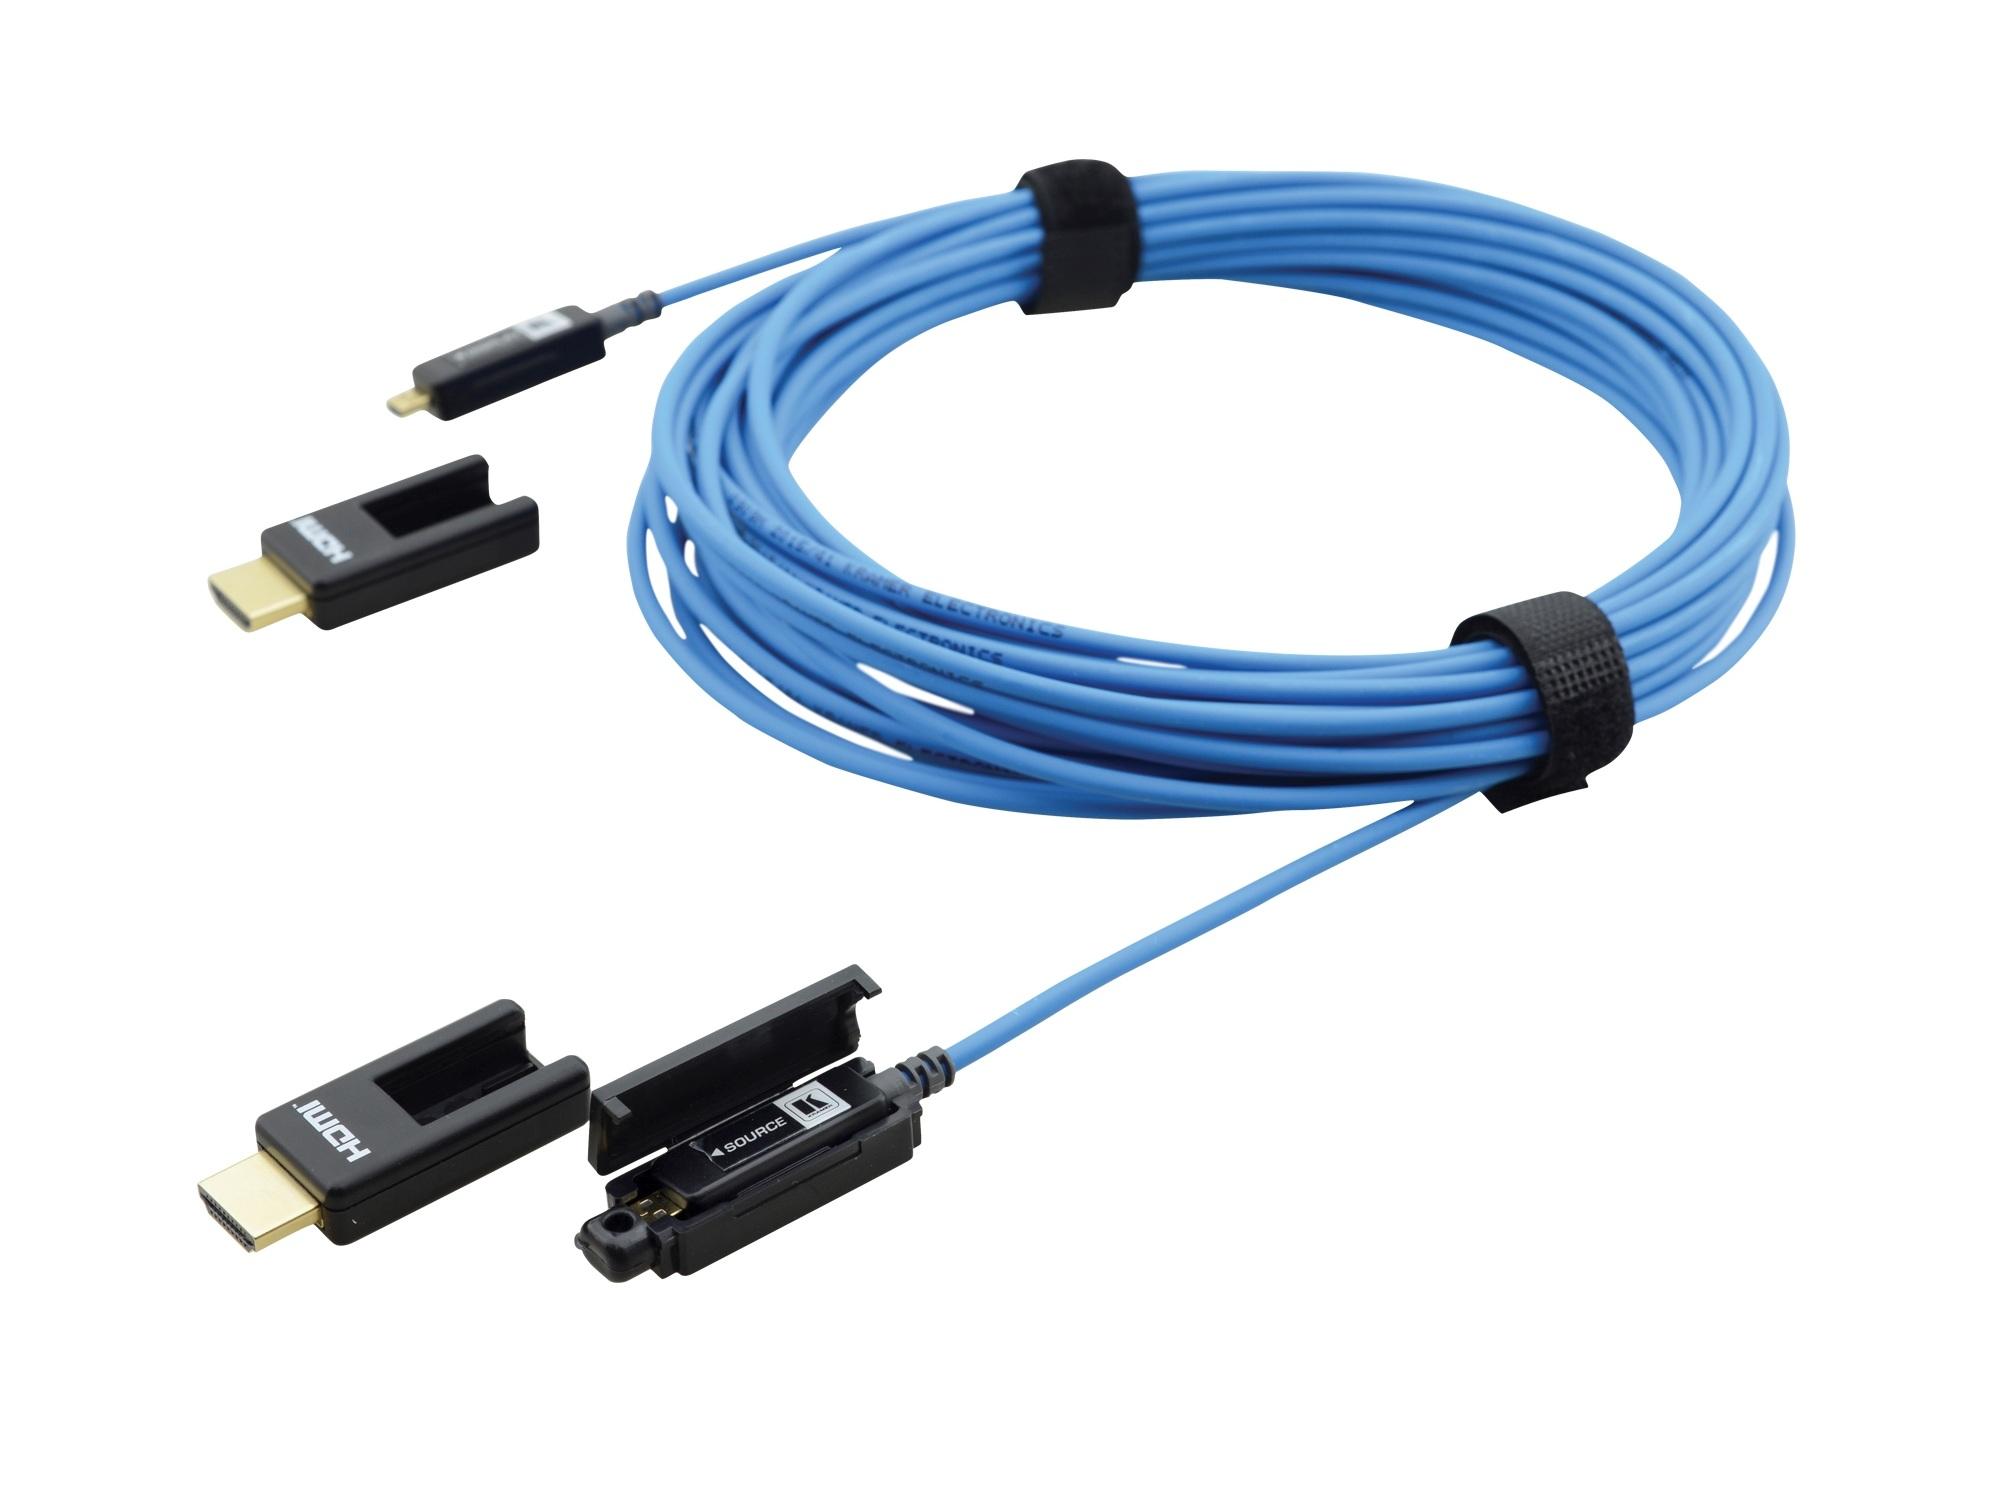 CP-AOCH/XL-295 Fiber Optic High-Speed Pluggable HDMI Cable - 295ft by Kramer